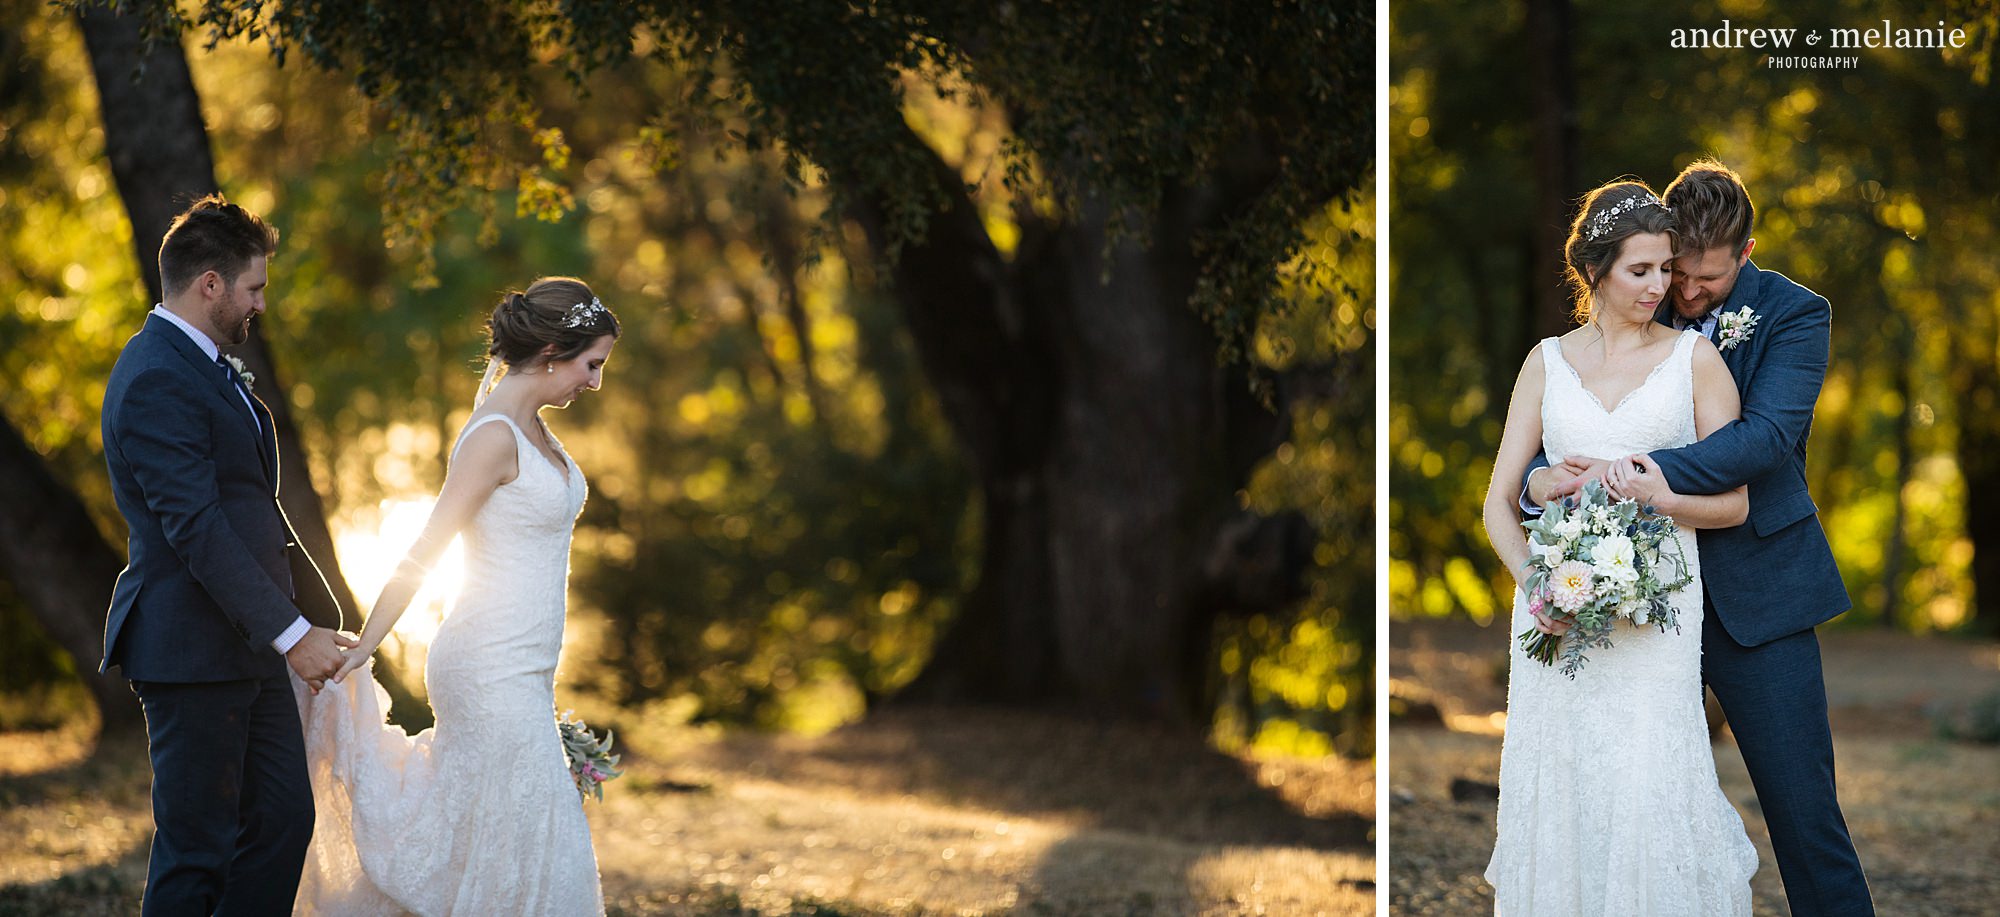 Andrew and Melanie Photography wedding highlights 